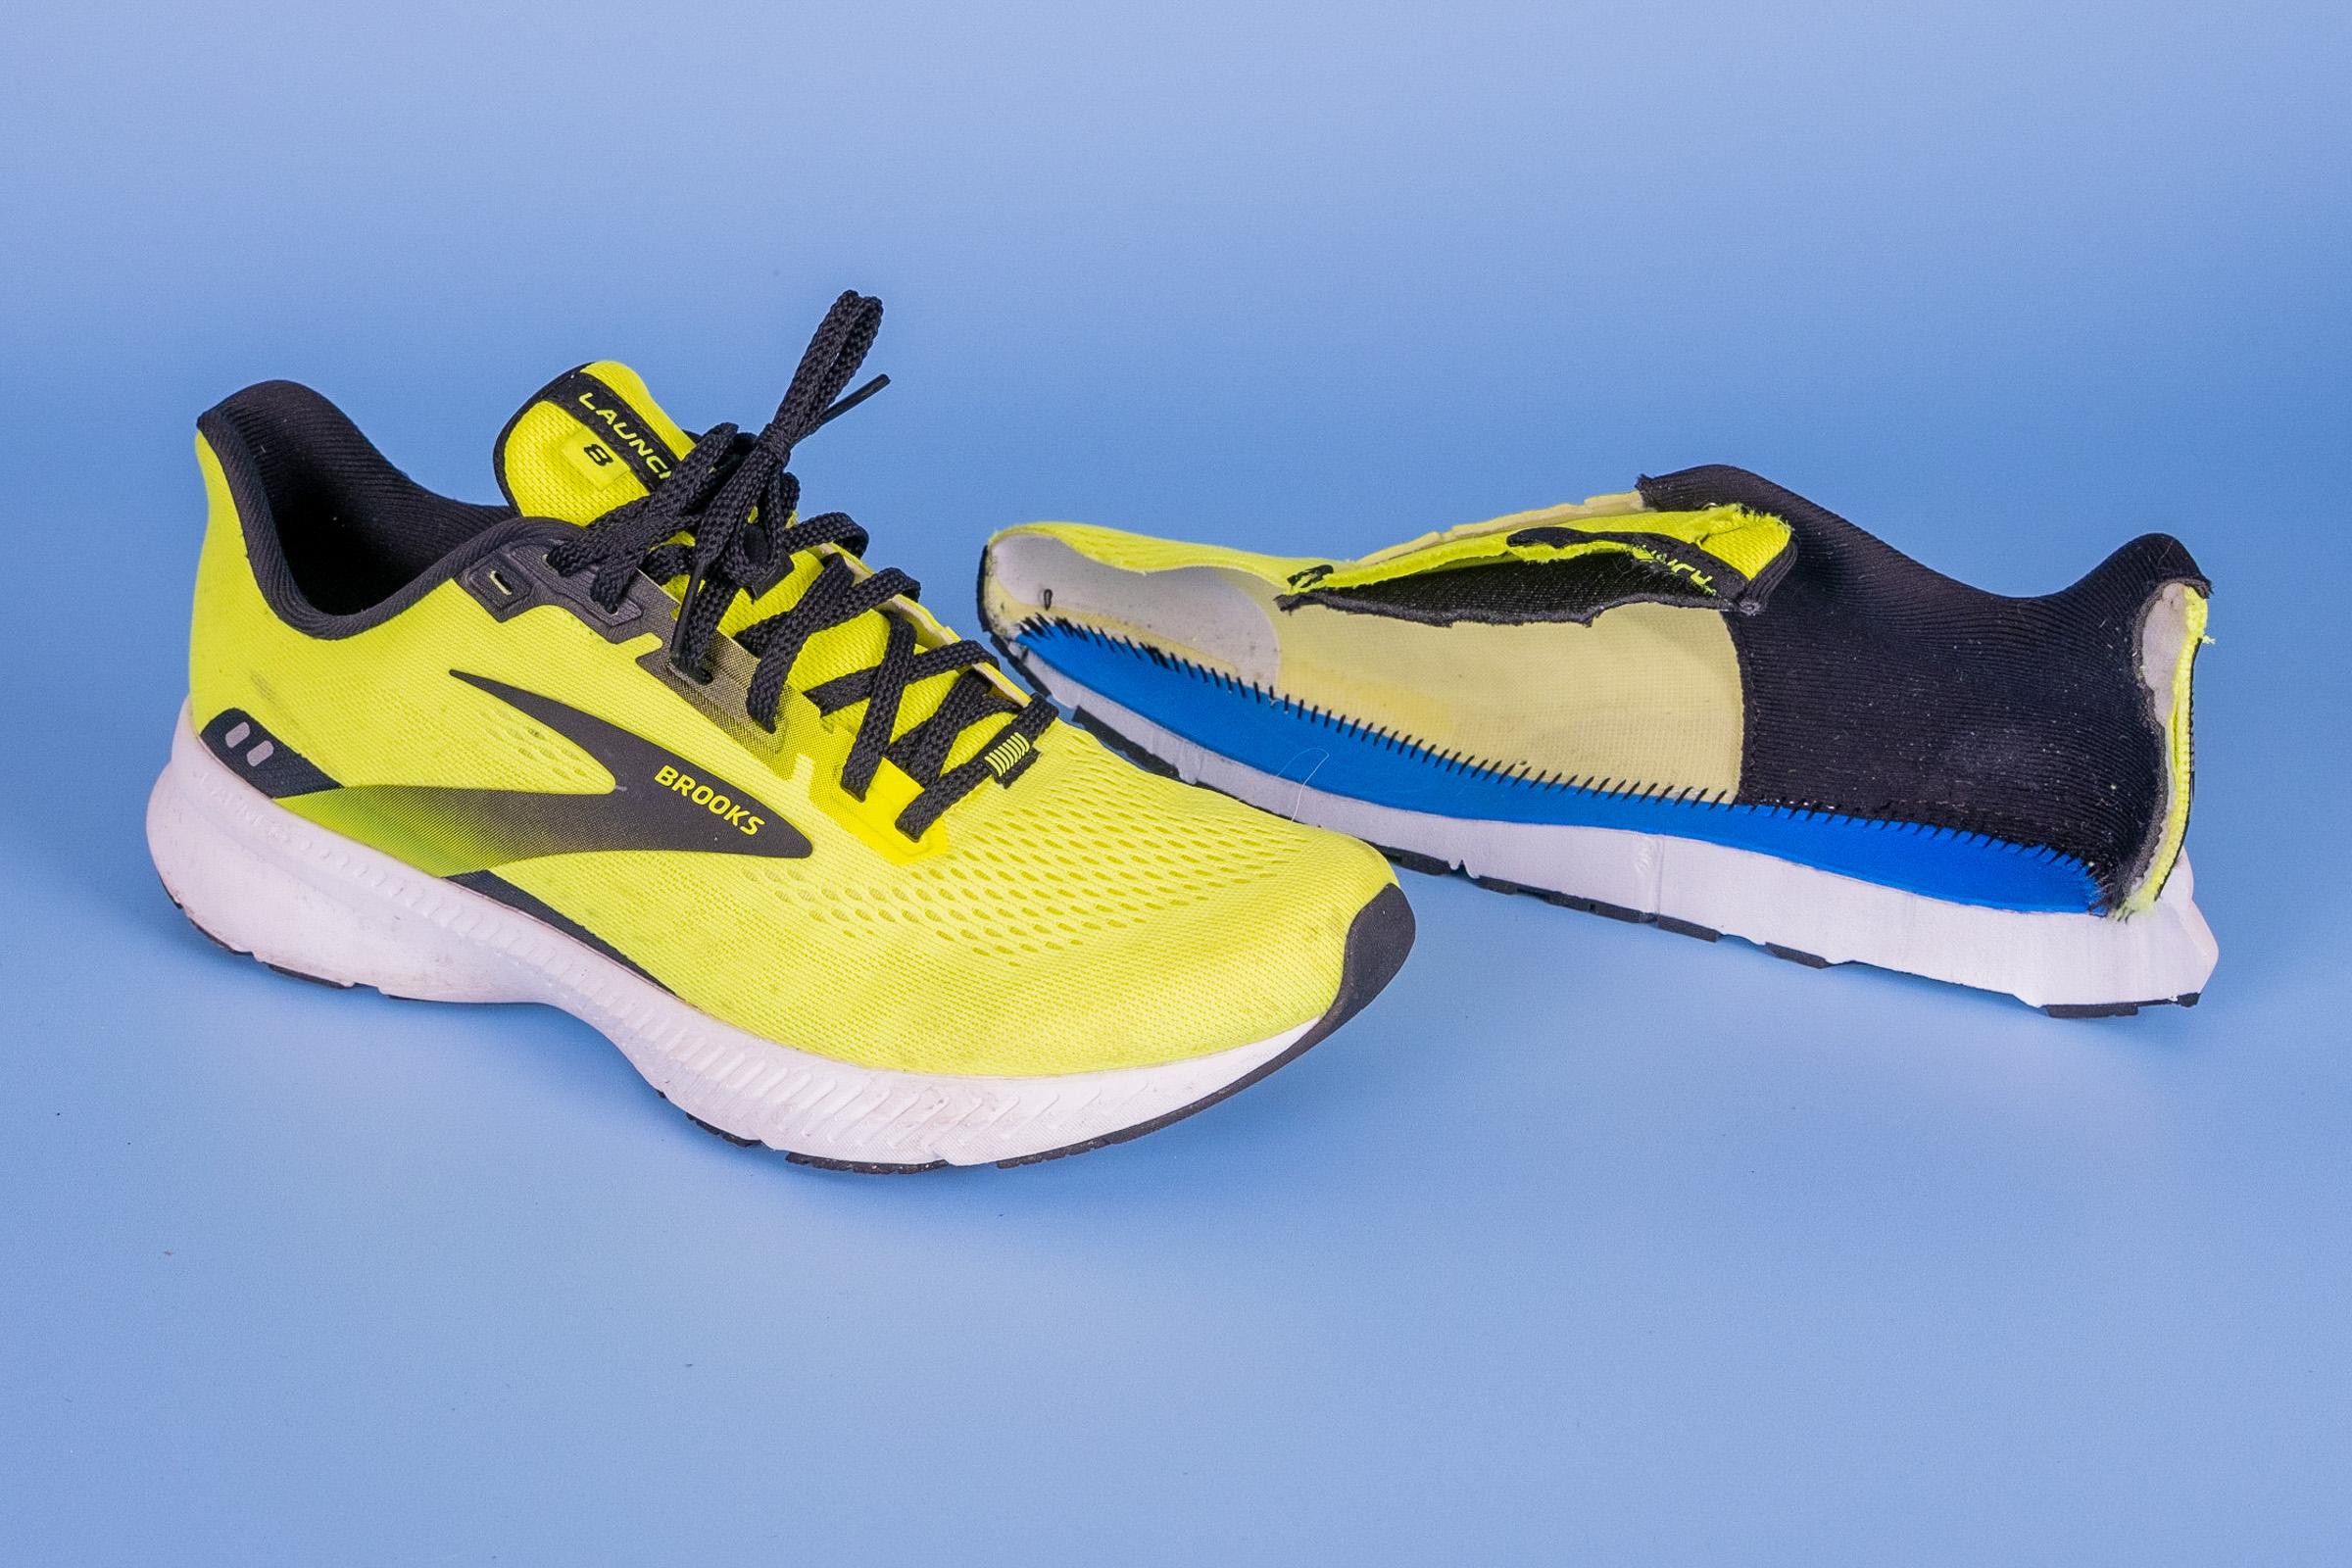 Cut in half: Brooks Launch 8 Review